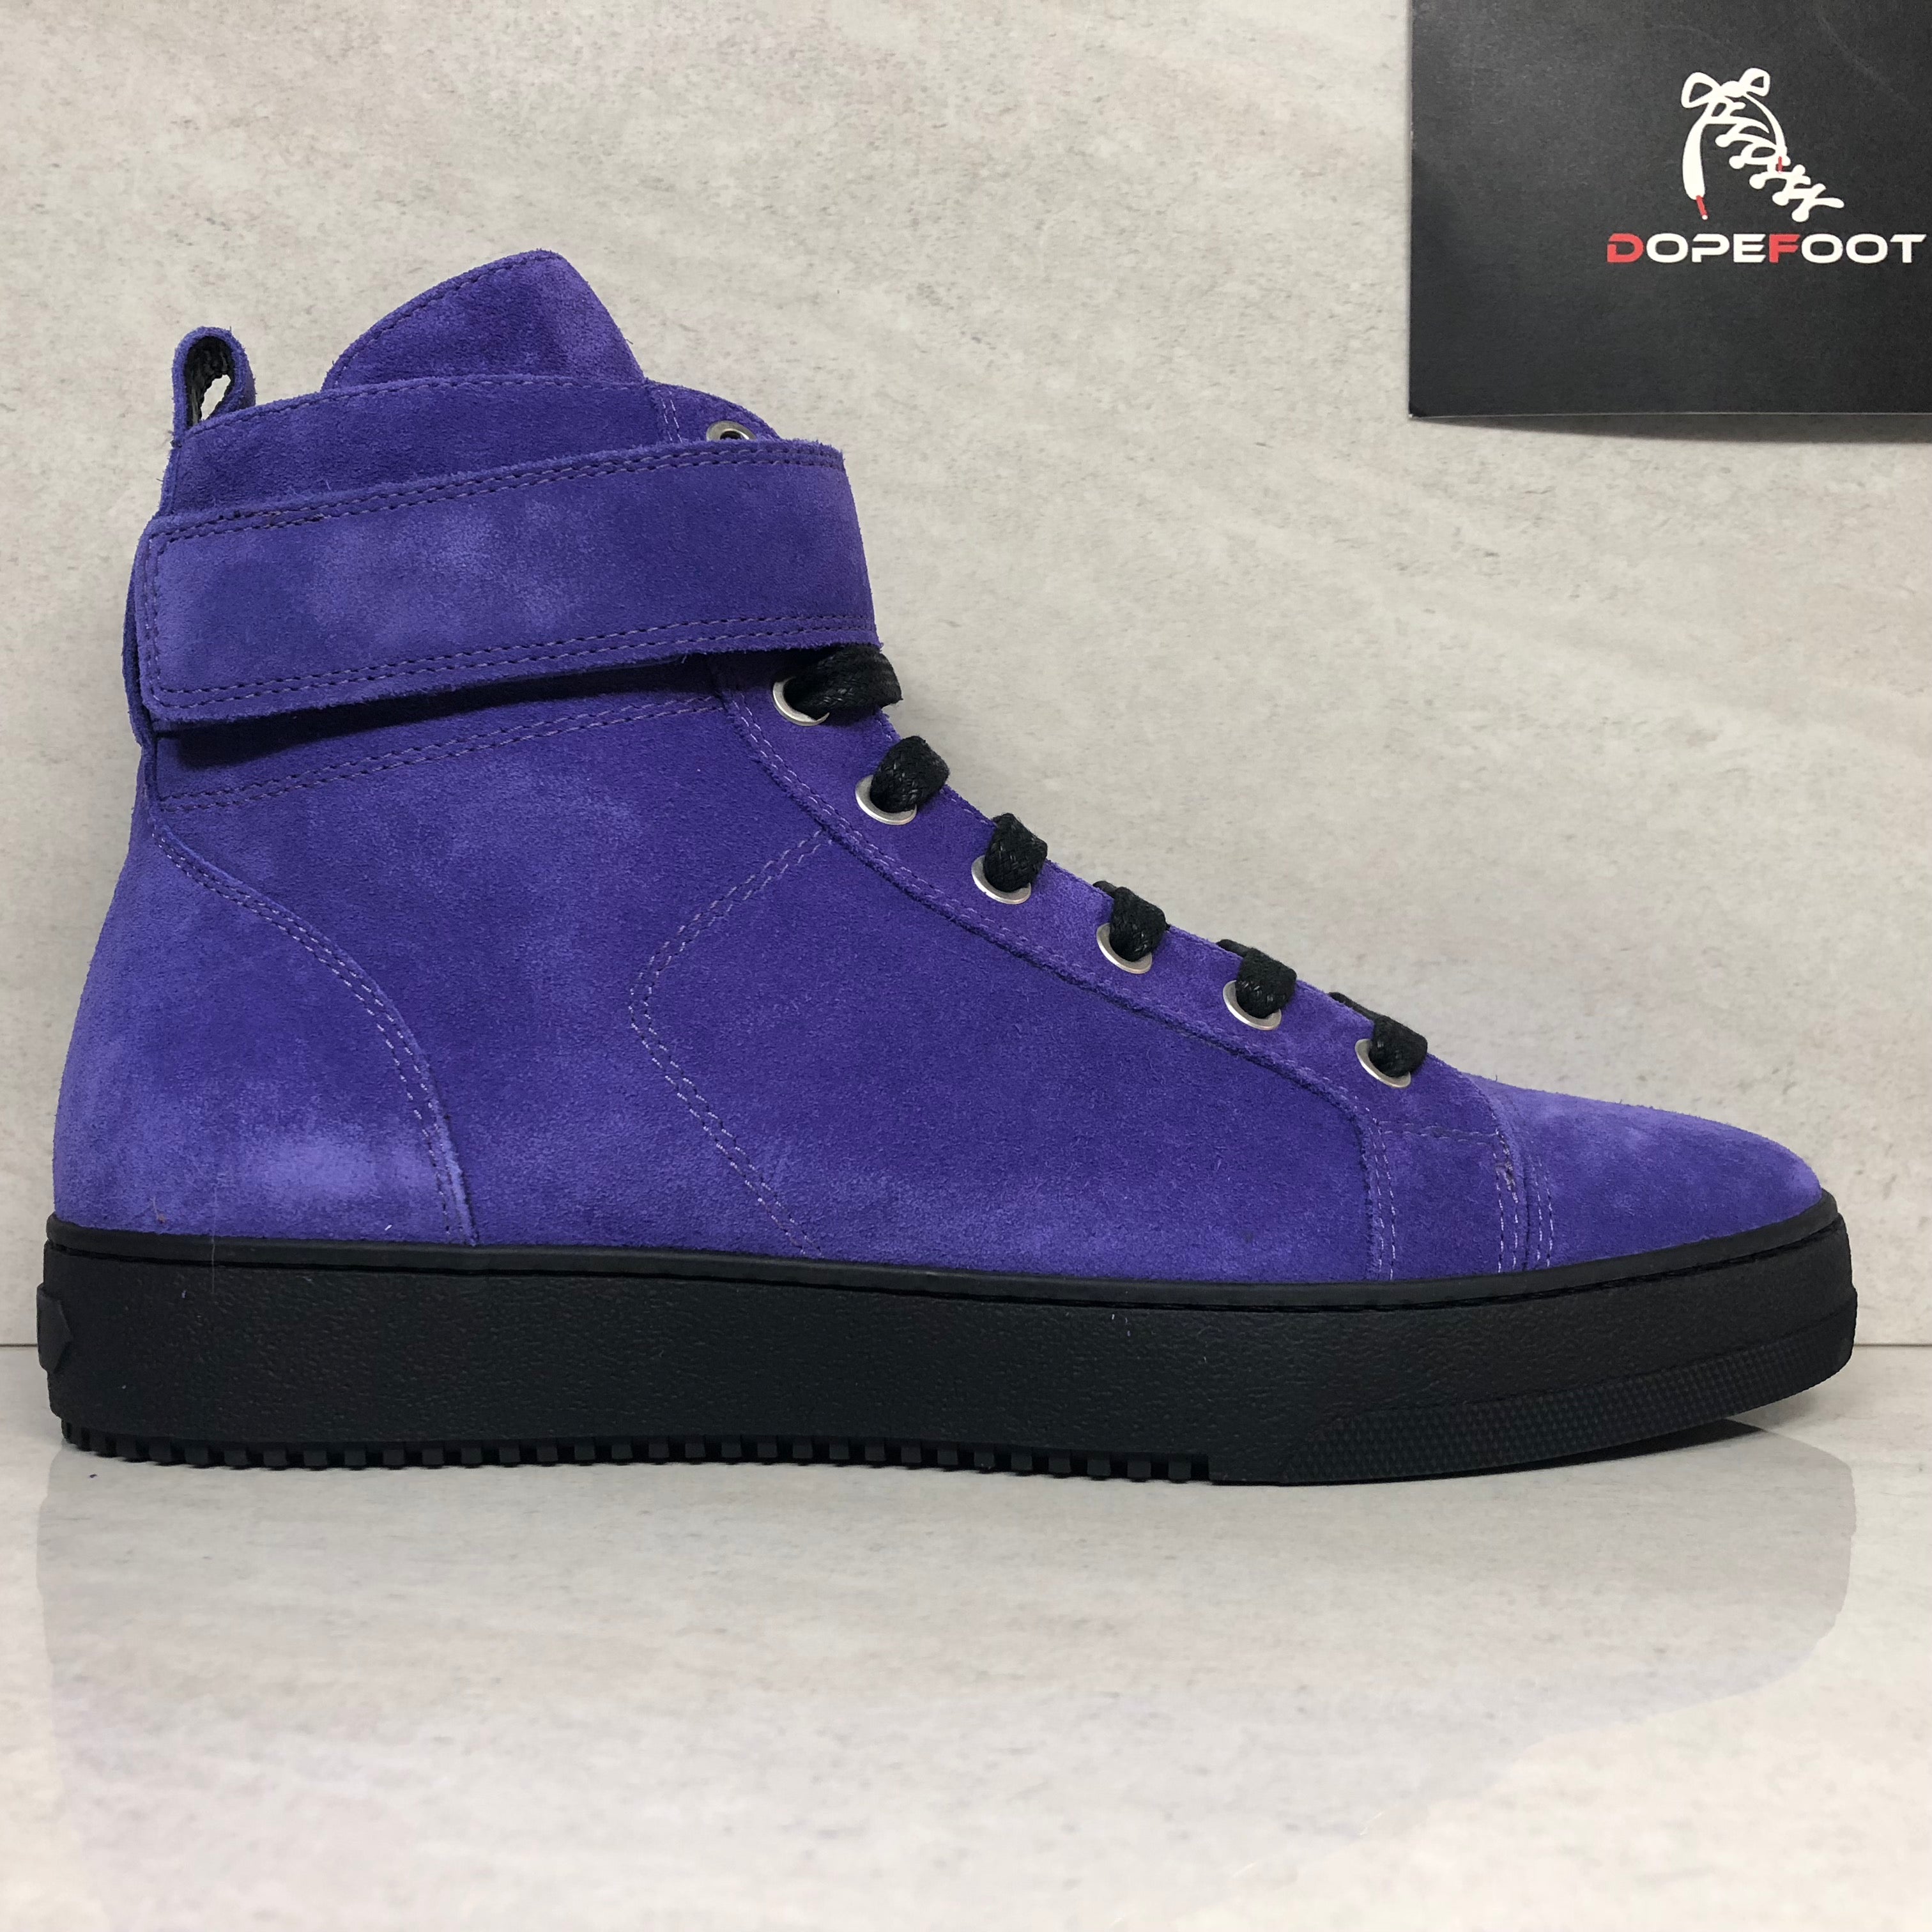 purple off white shoes